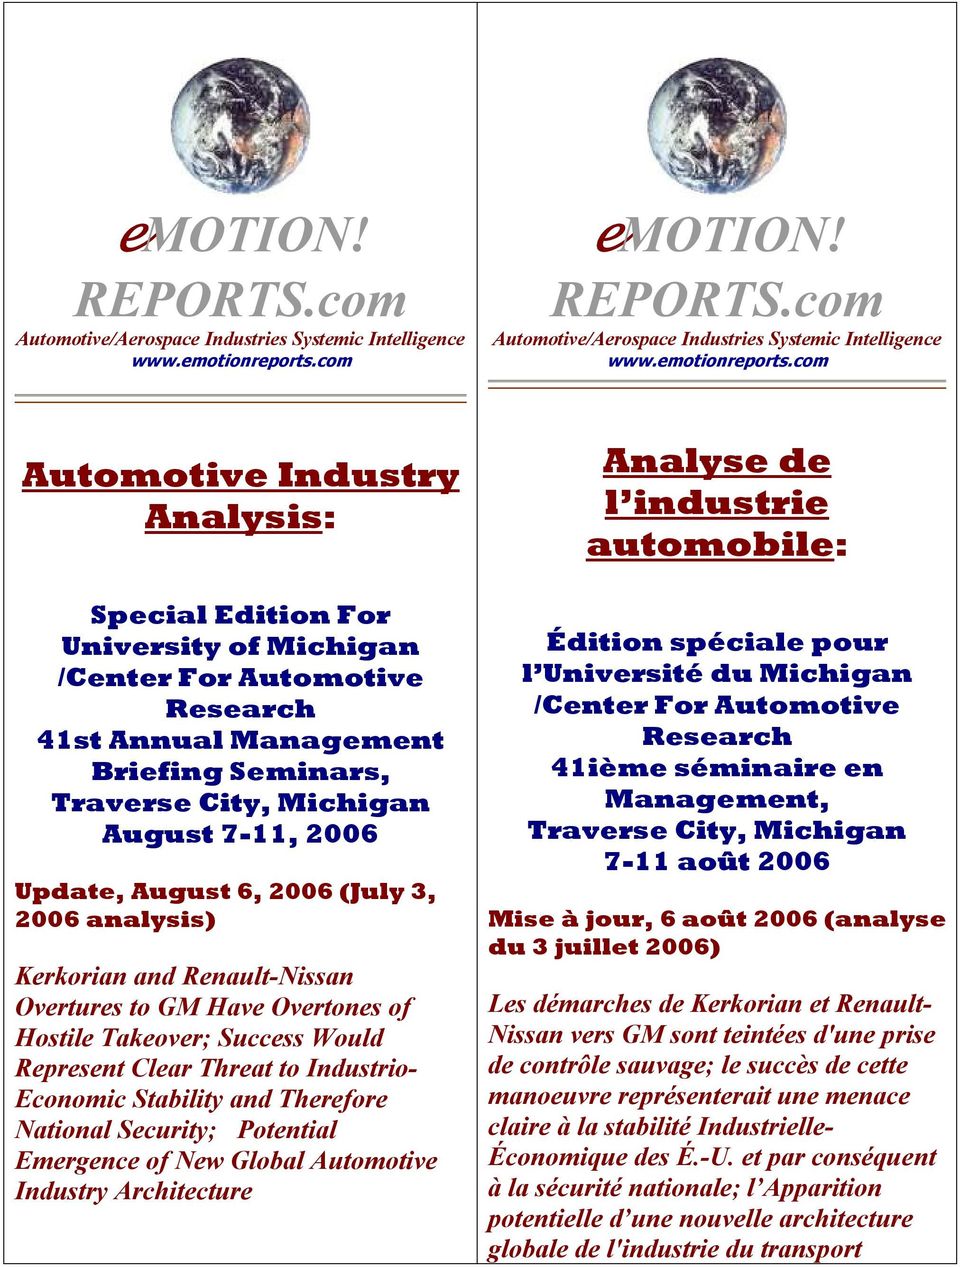 Update, August 6, 2006 (July 3, 2006 analysis) Kerkorian and Renault-Nissan Overtures to GM Have Overtones of Hostile Takeover; Success Would Represent Clear Threat to Industrio- Economic Stability